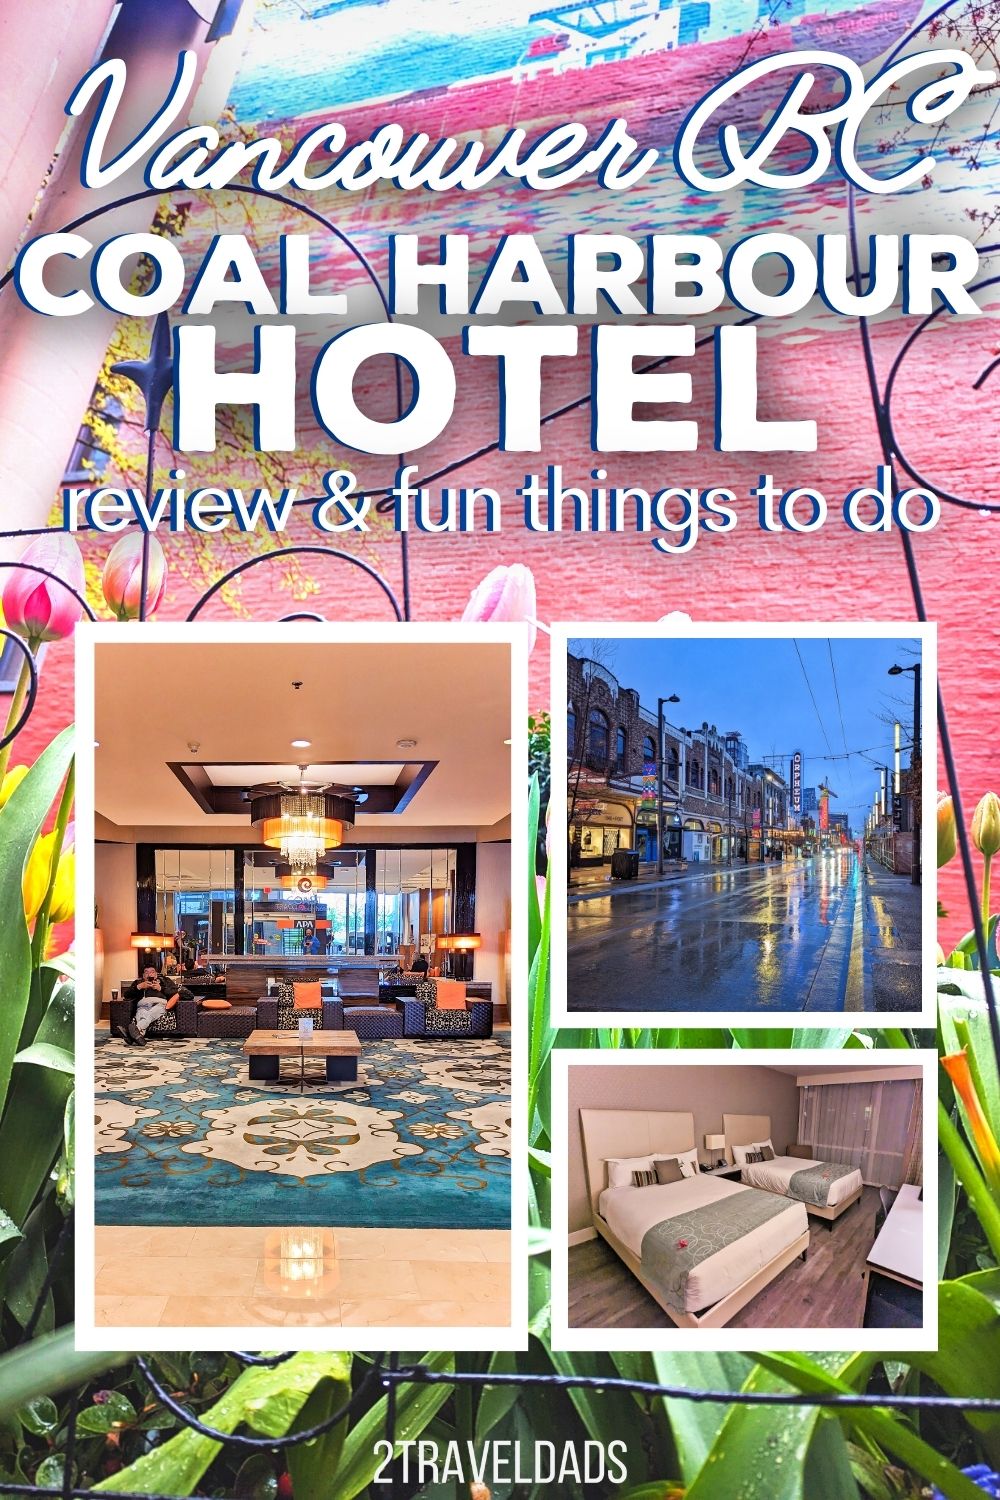 The Coast Coal Harbour Hotel in Vancouver BC may not seem like the top pick for a weekend trip, but between its location and amenities, you'll see why it's our go-to for low key, fun trips to Vancouver. Details on hotel accommodations and things to do near the Coast Coal Harbour Hotel.